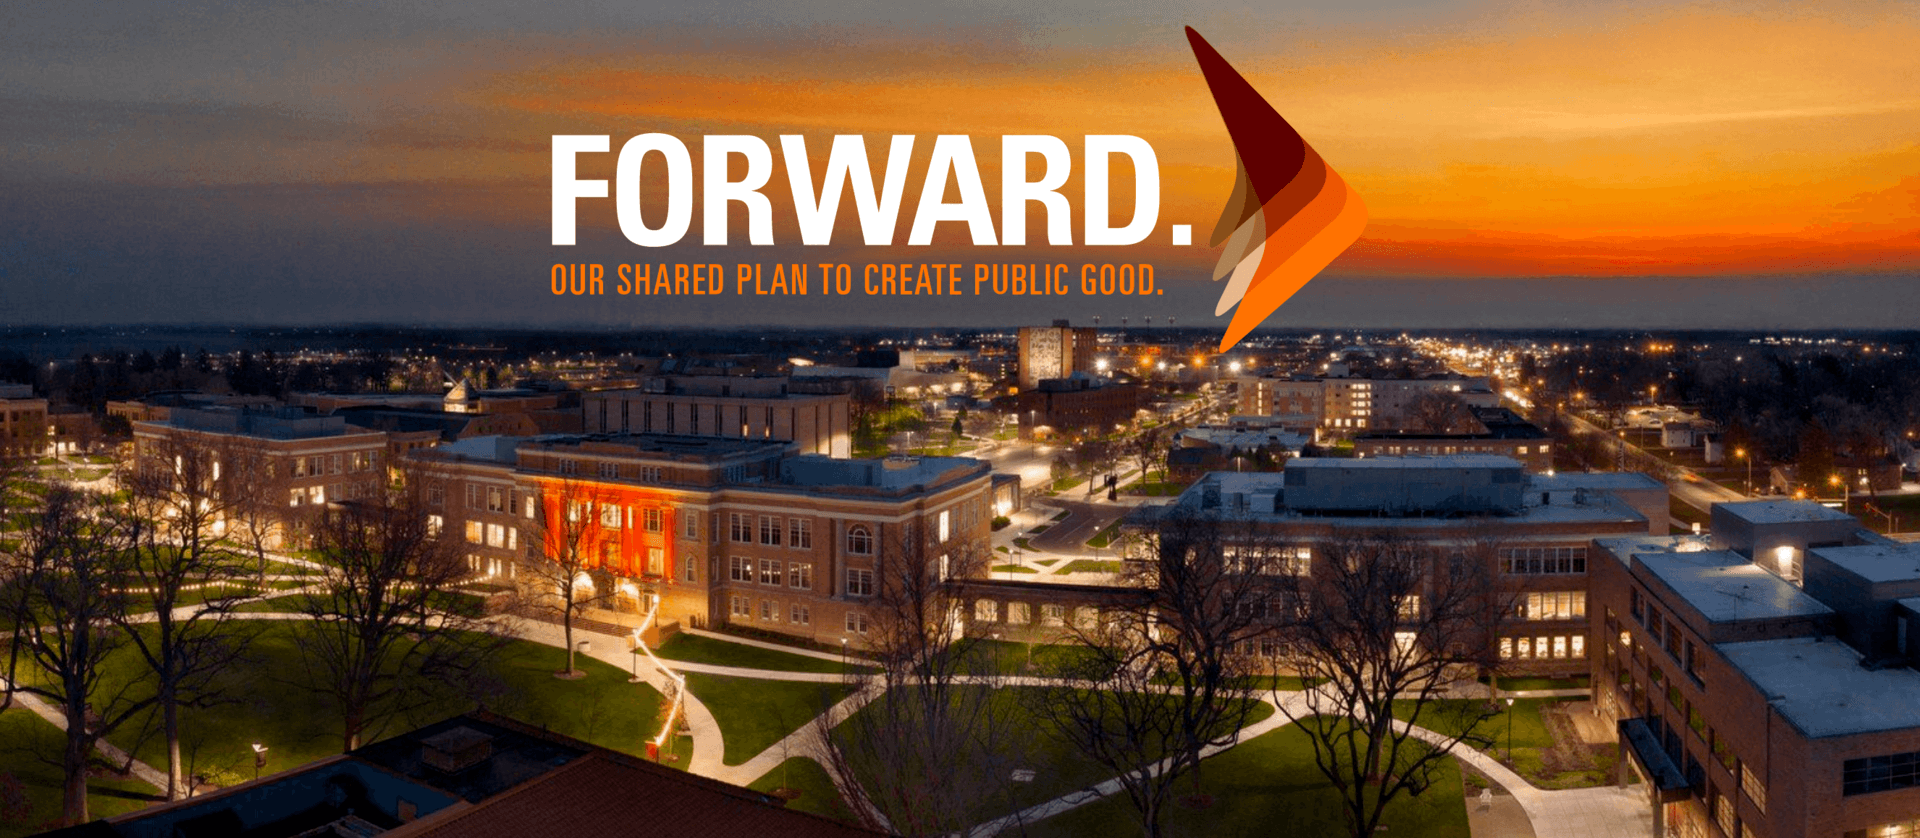 Forawrd-our-shared-plan-to-create-public-good